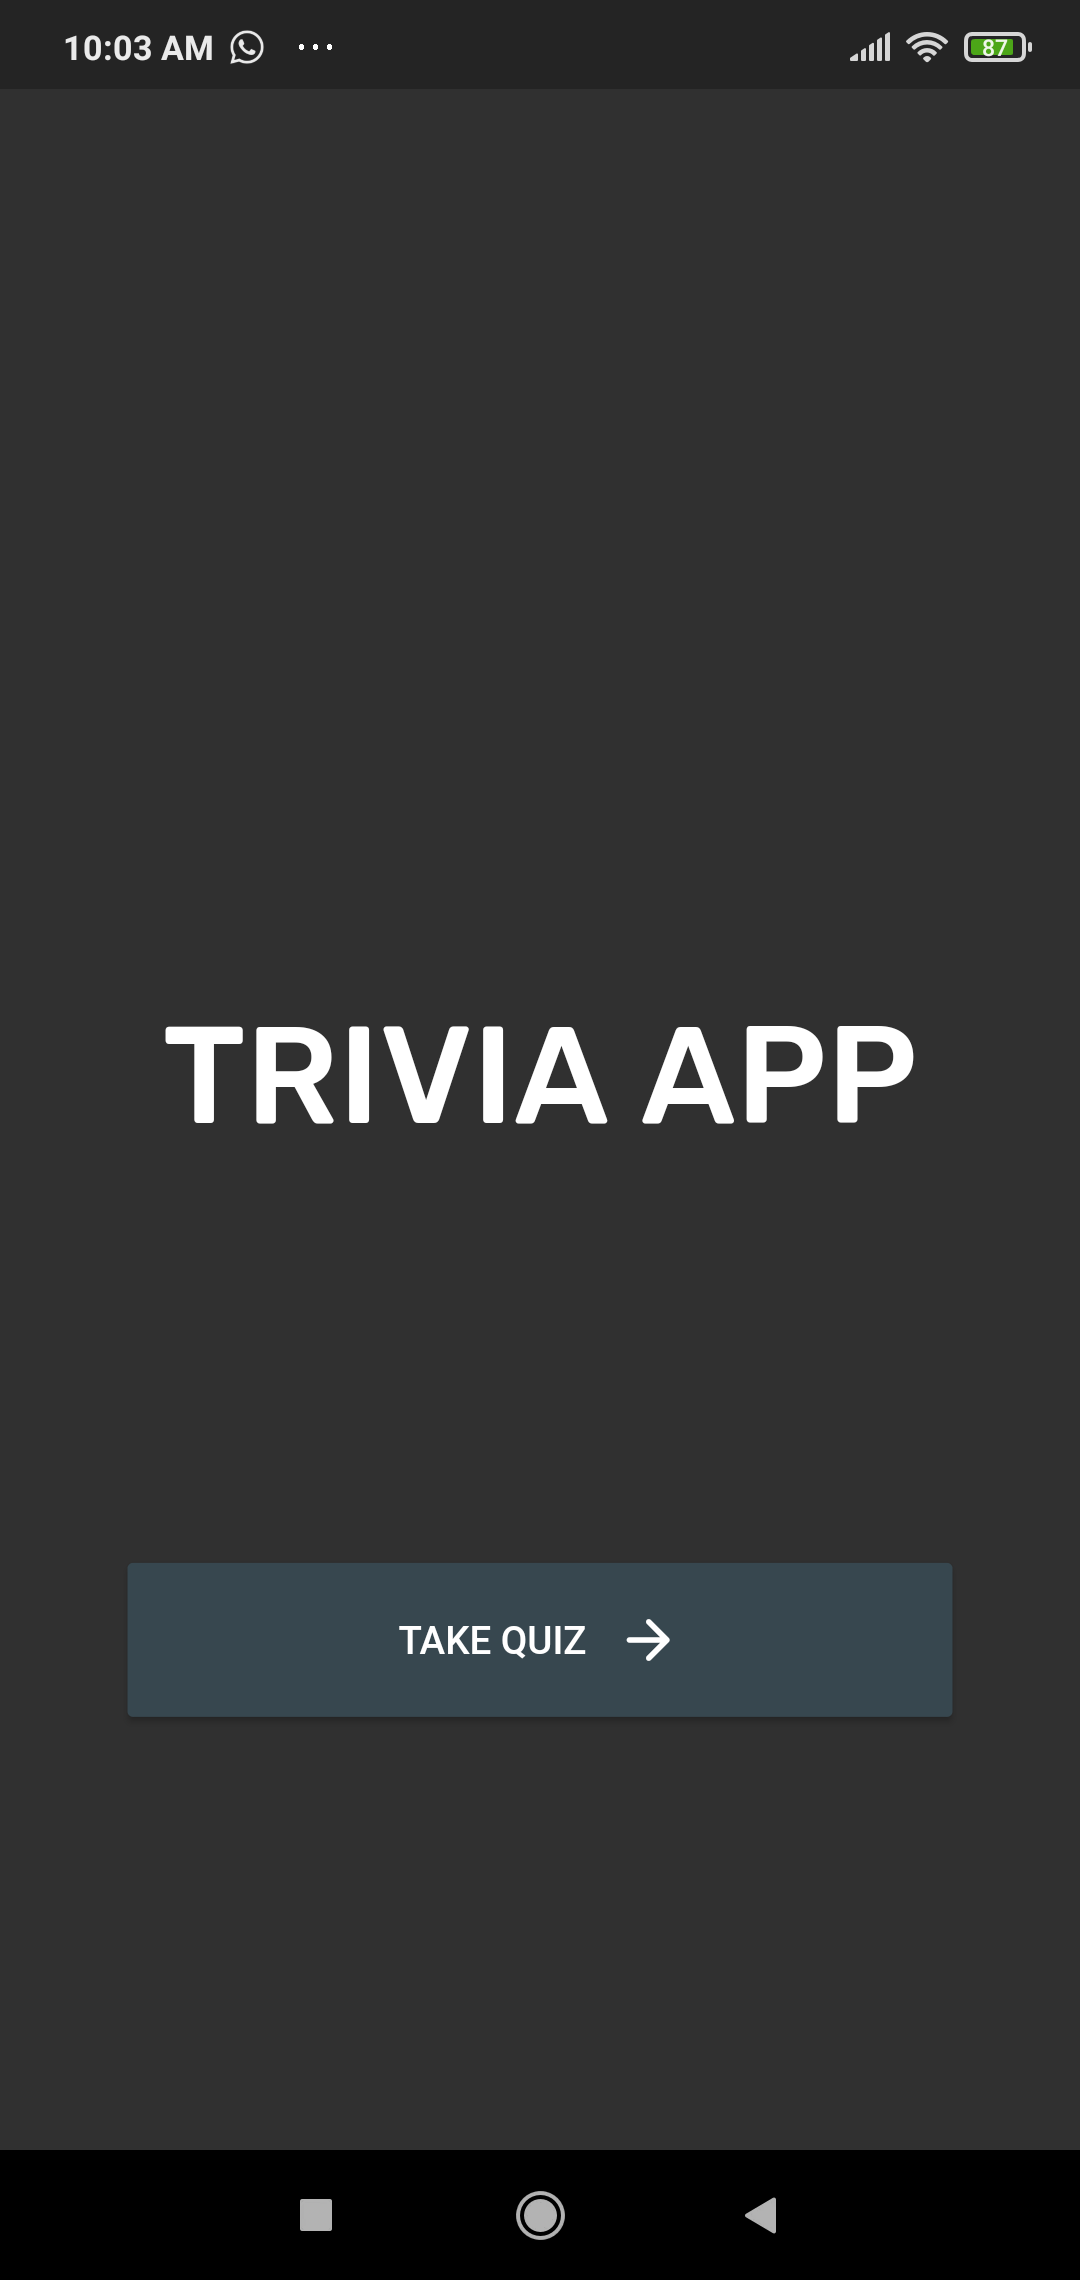 A trivia/quiz app made in flutter for answering fun trivia questions